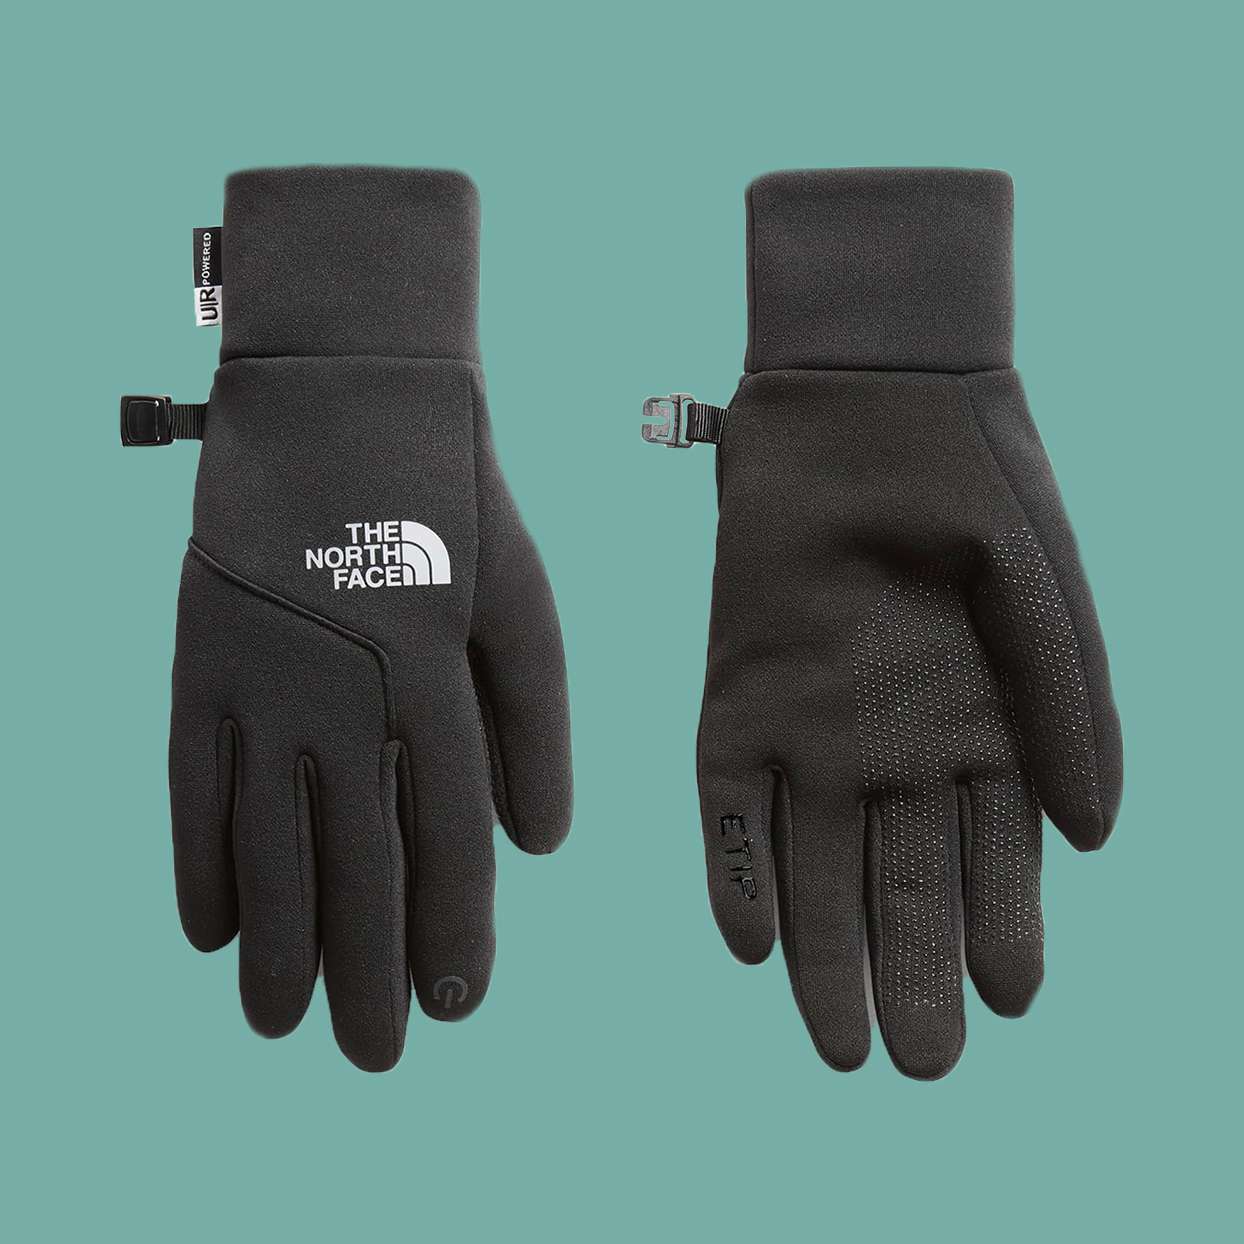 The North Face E-Tip Gloves 1244x1244